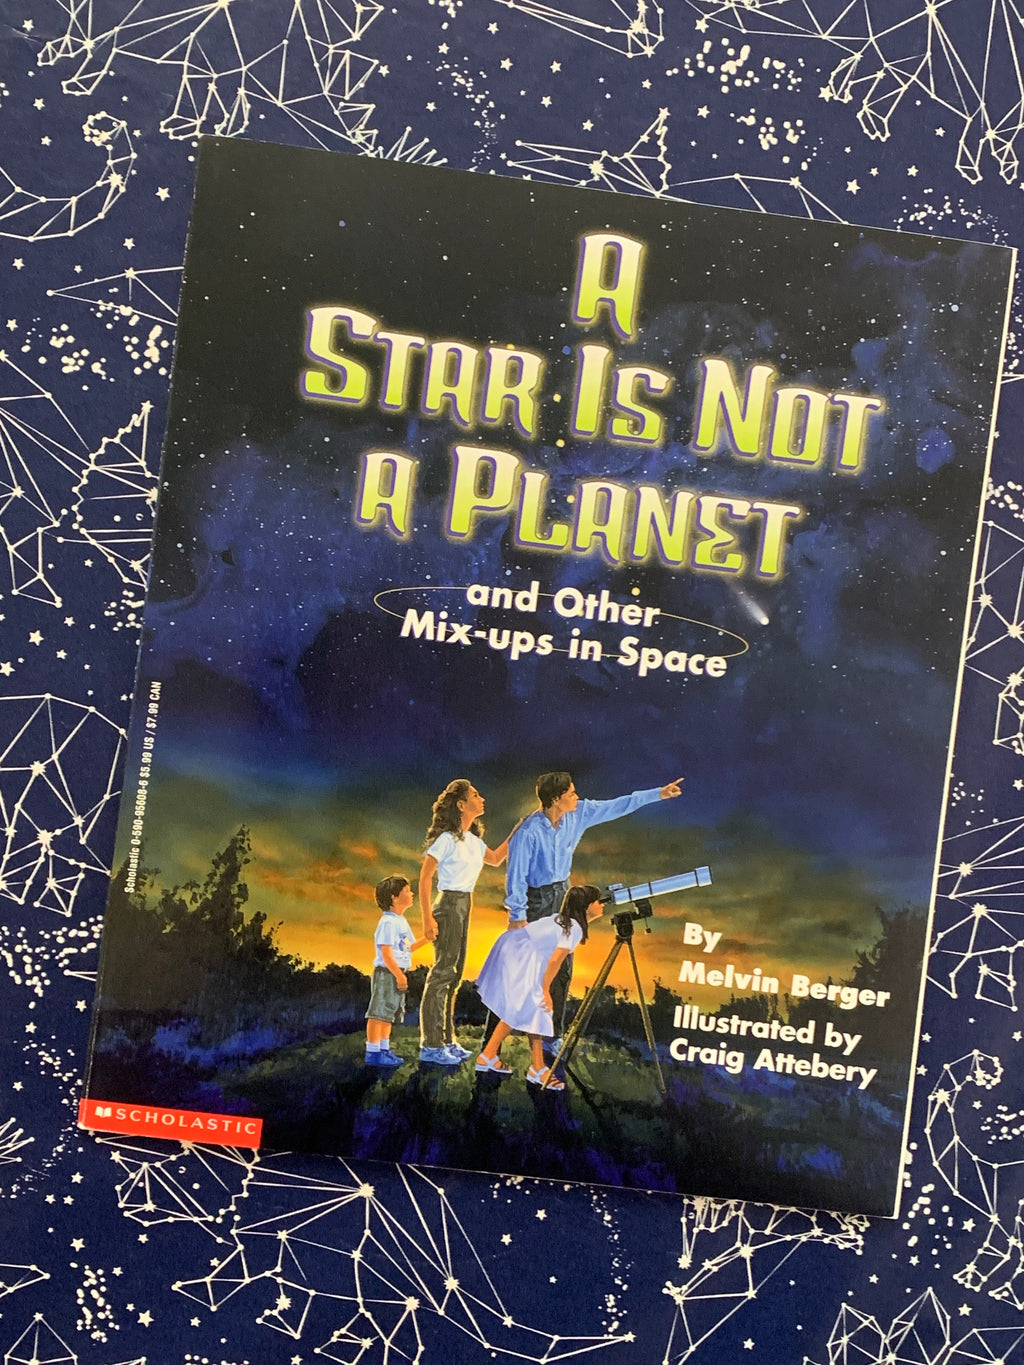 A Star is Not A Planet: and Other Mix-ups in Space- By Melvin Berger